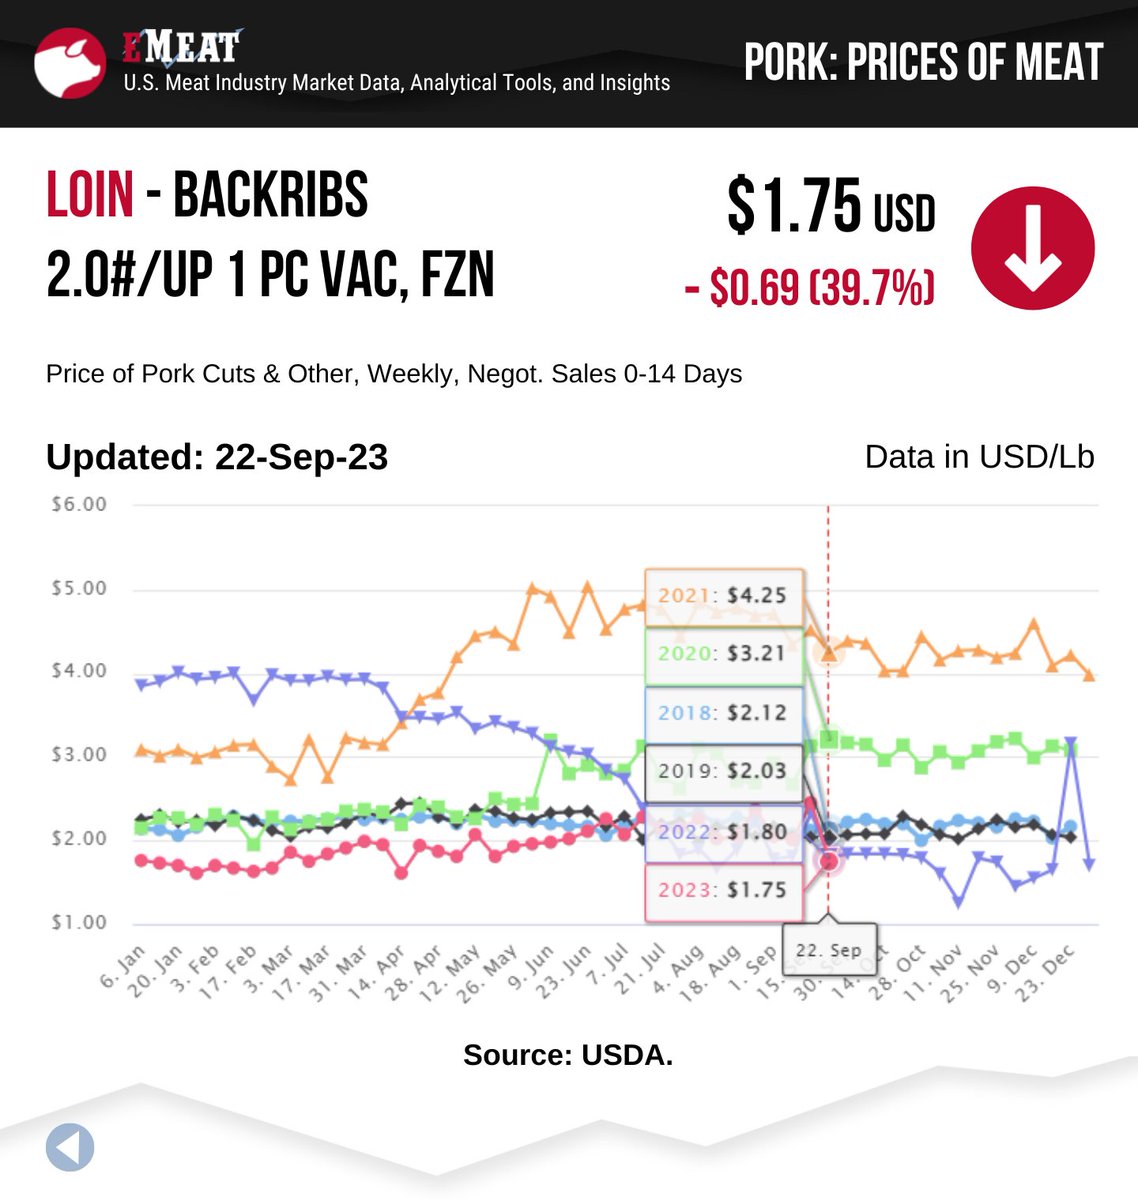 🚨EMEAT PRICE ALERTS! 🚨 Discover the surprising price fluctuations in the Meat Industry during the past week!

emeat.io

#beef #marketdata #prices #meat #pork #porkloin #porkbelly #analytics #data #meatindustry #beefcattle #hog #swine #markets #protein #alerts…